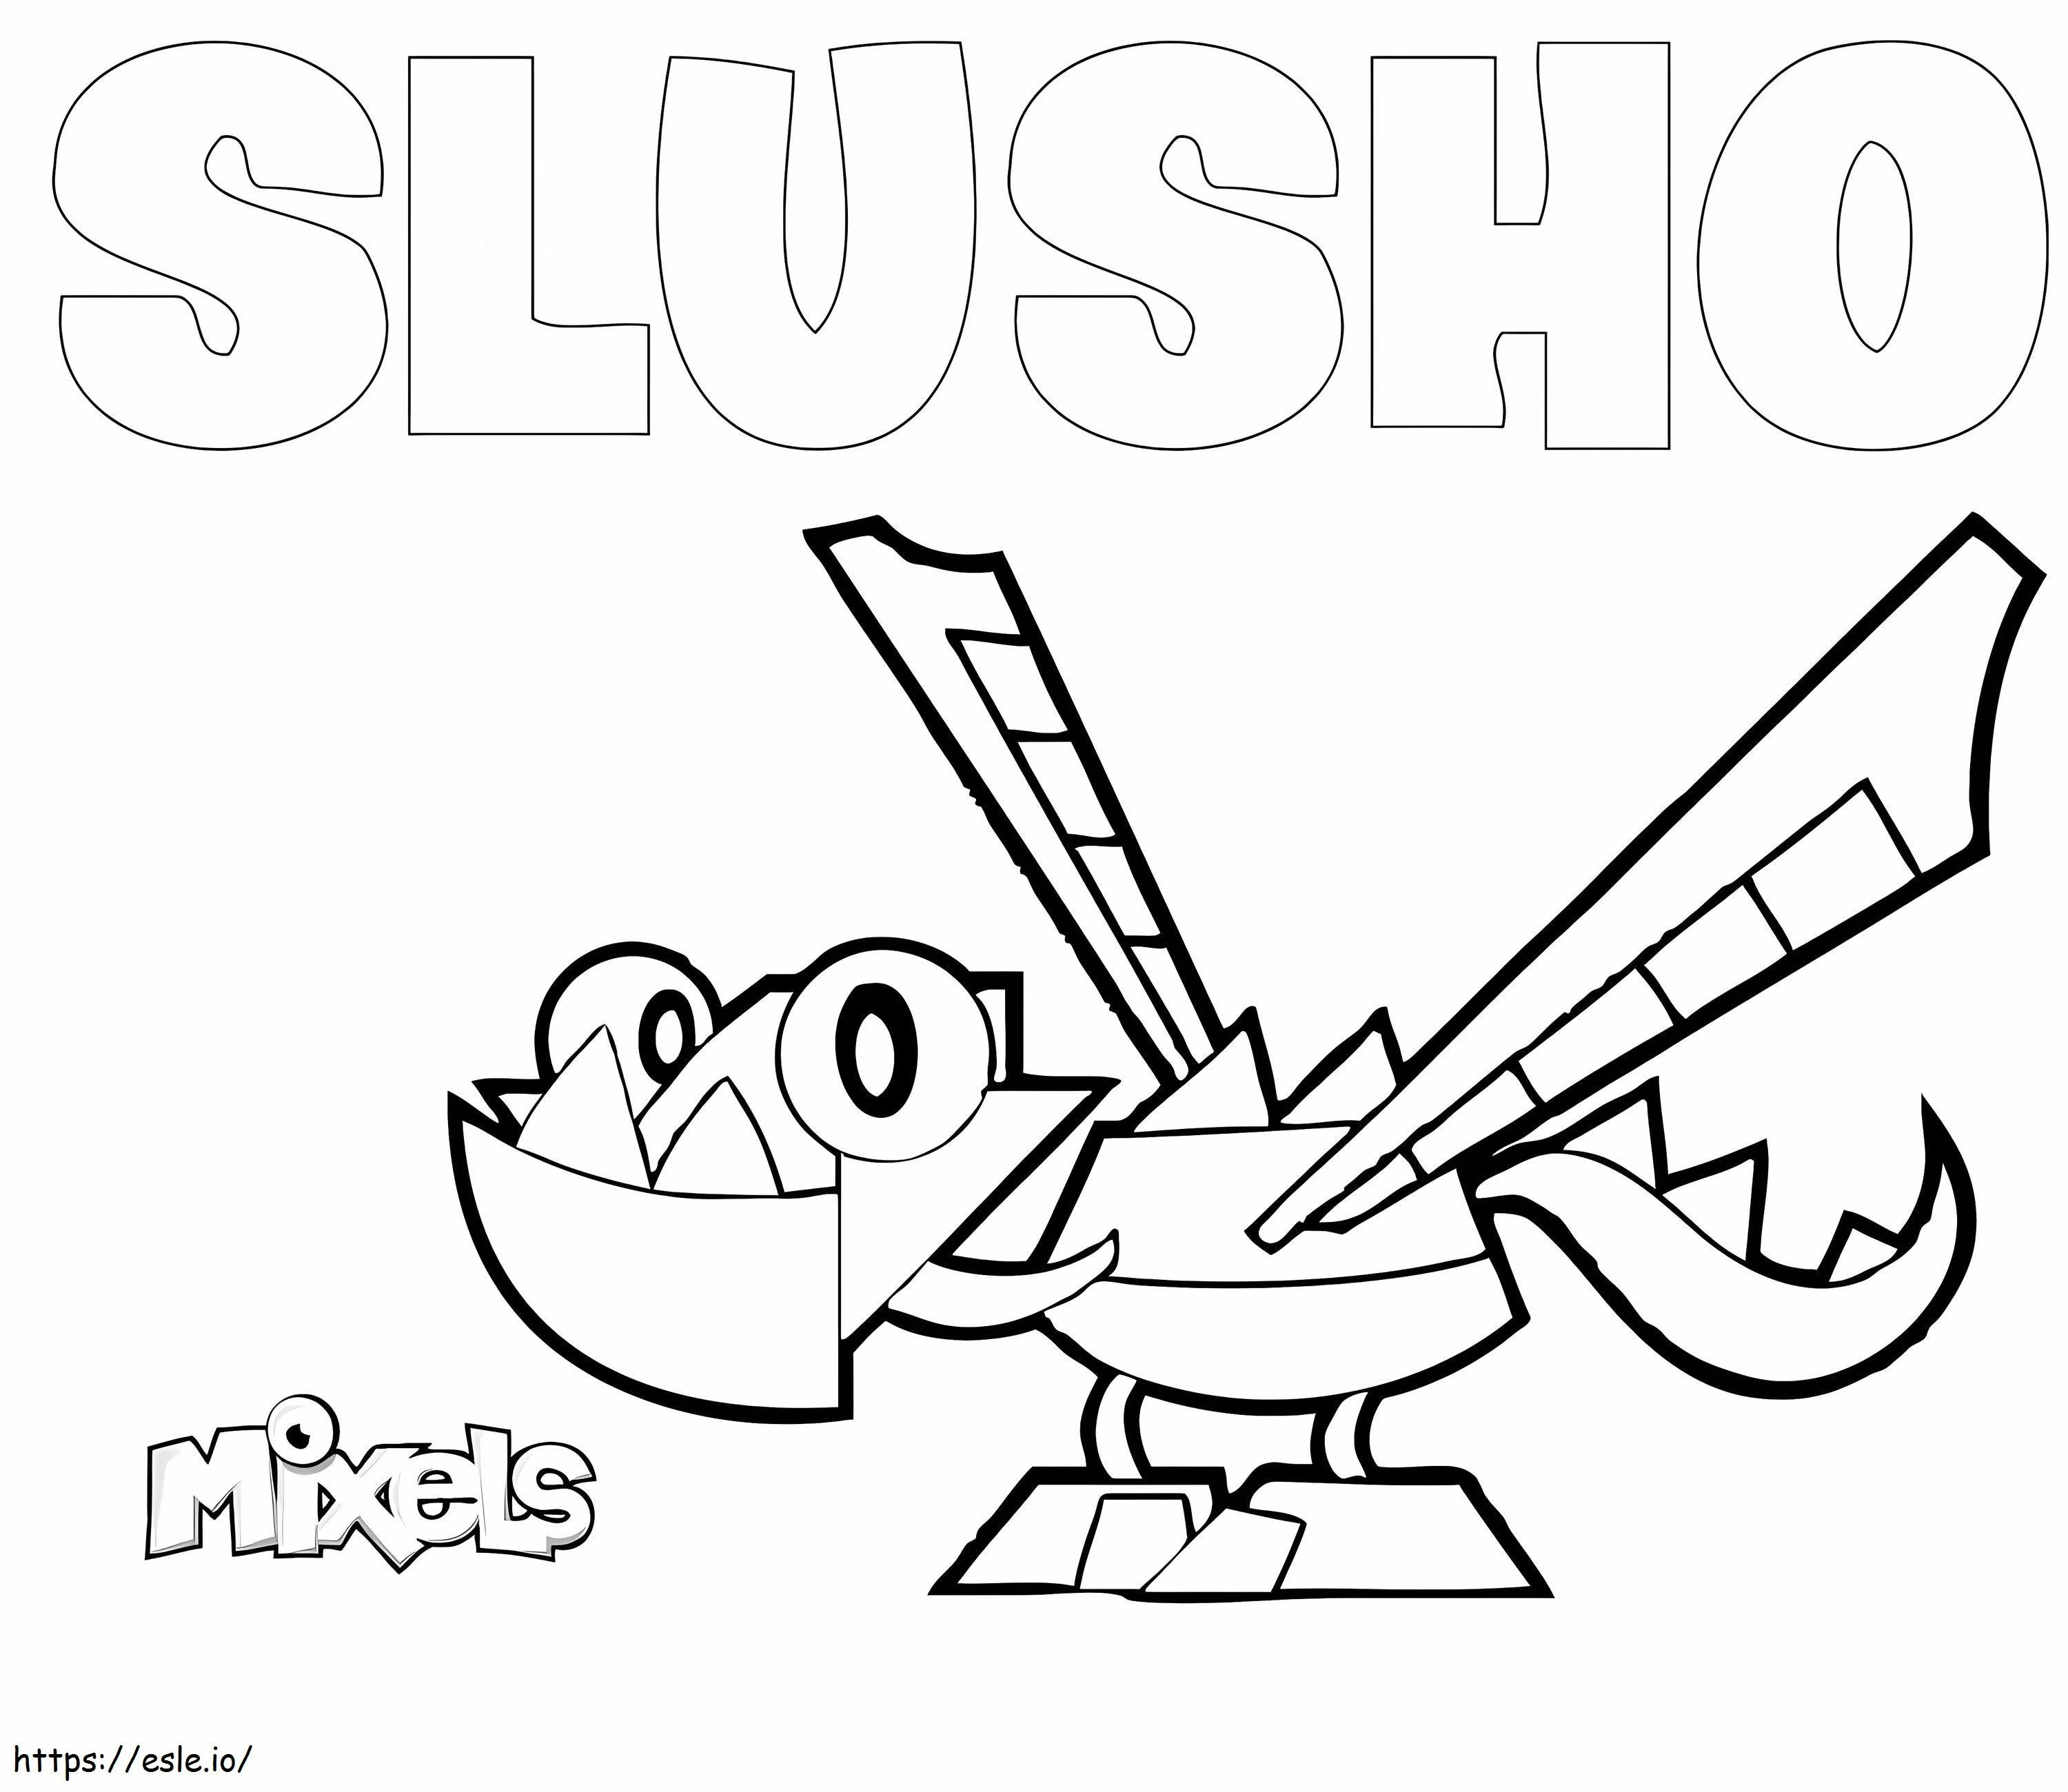 1544748973 Money Awesome Mixels Of Money coloring page